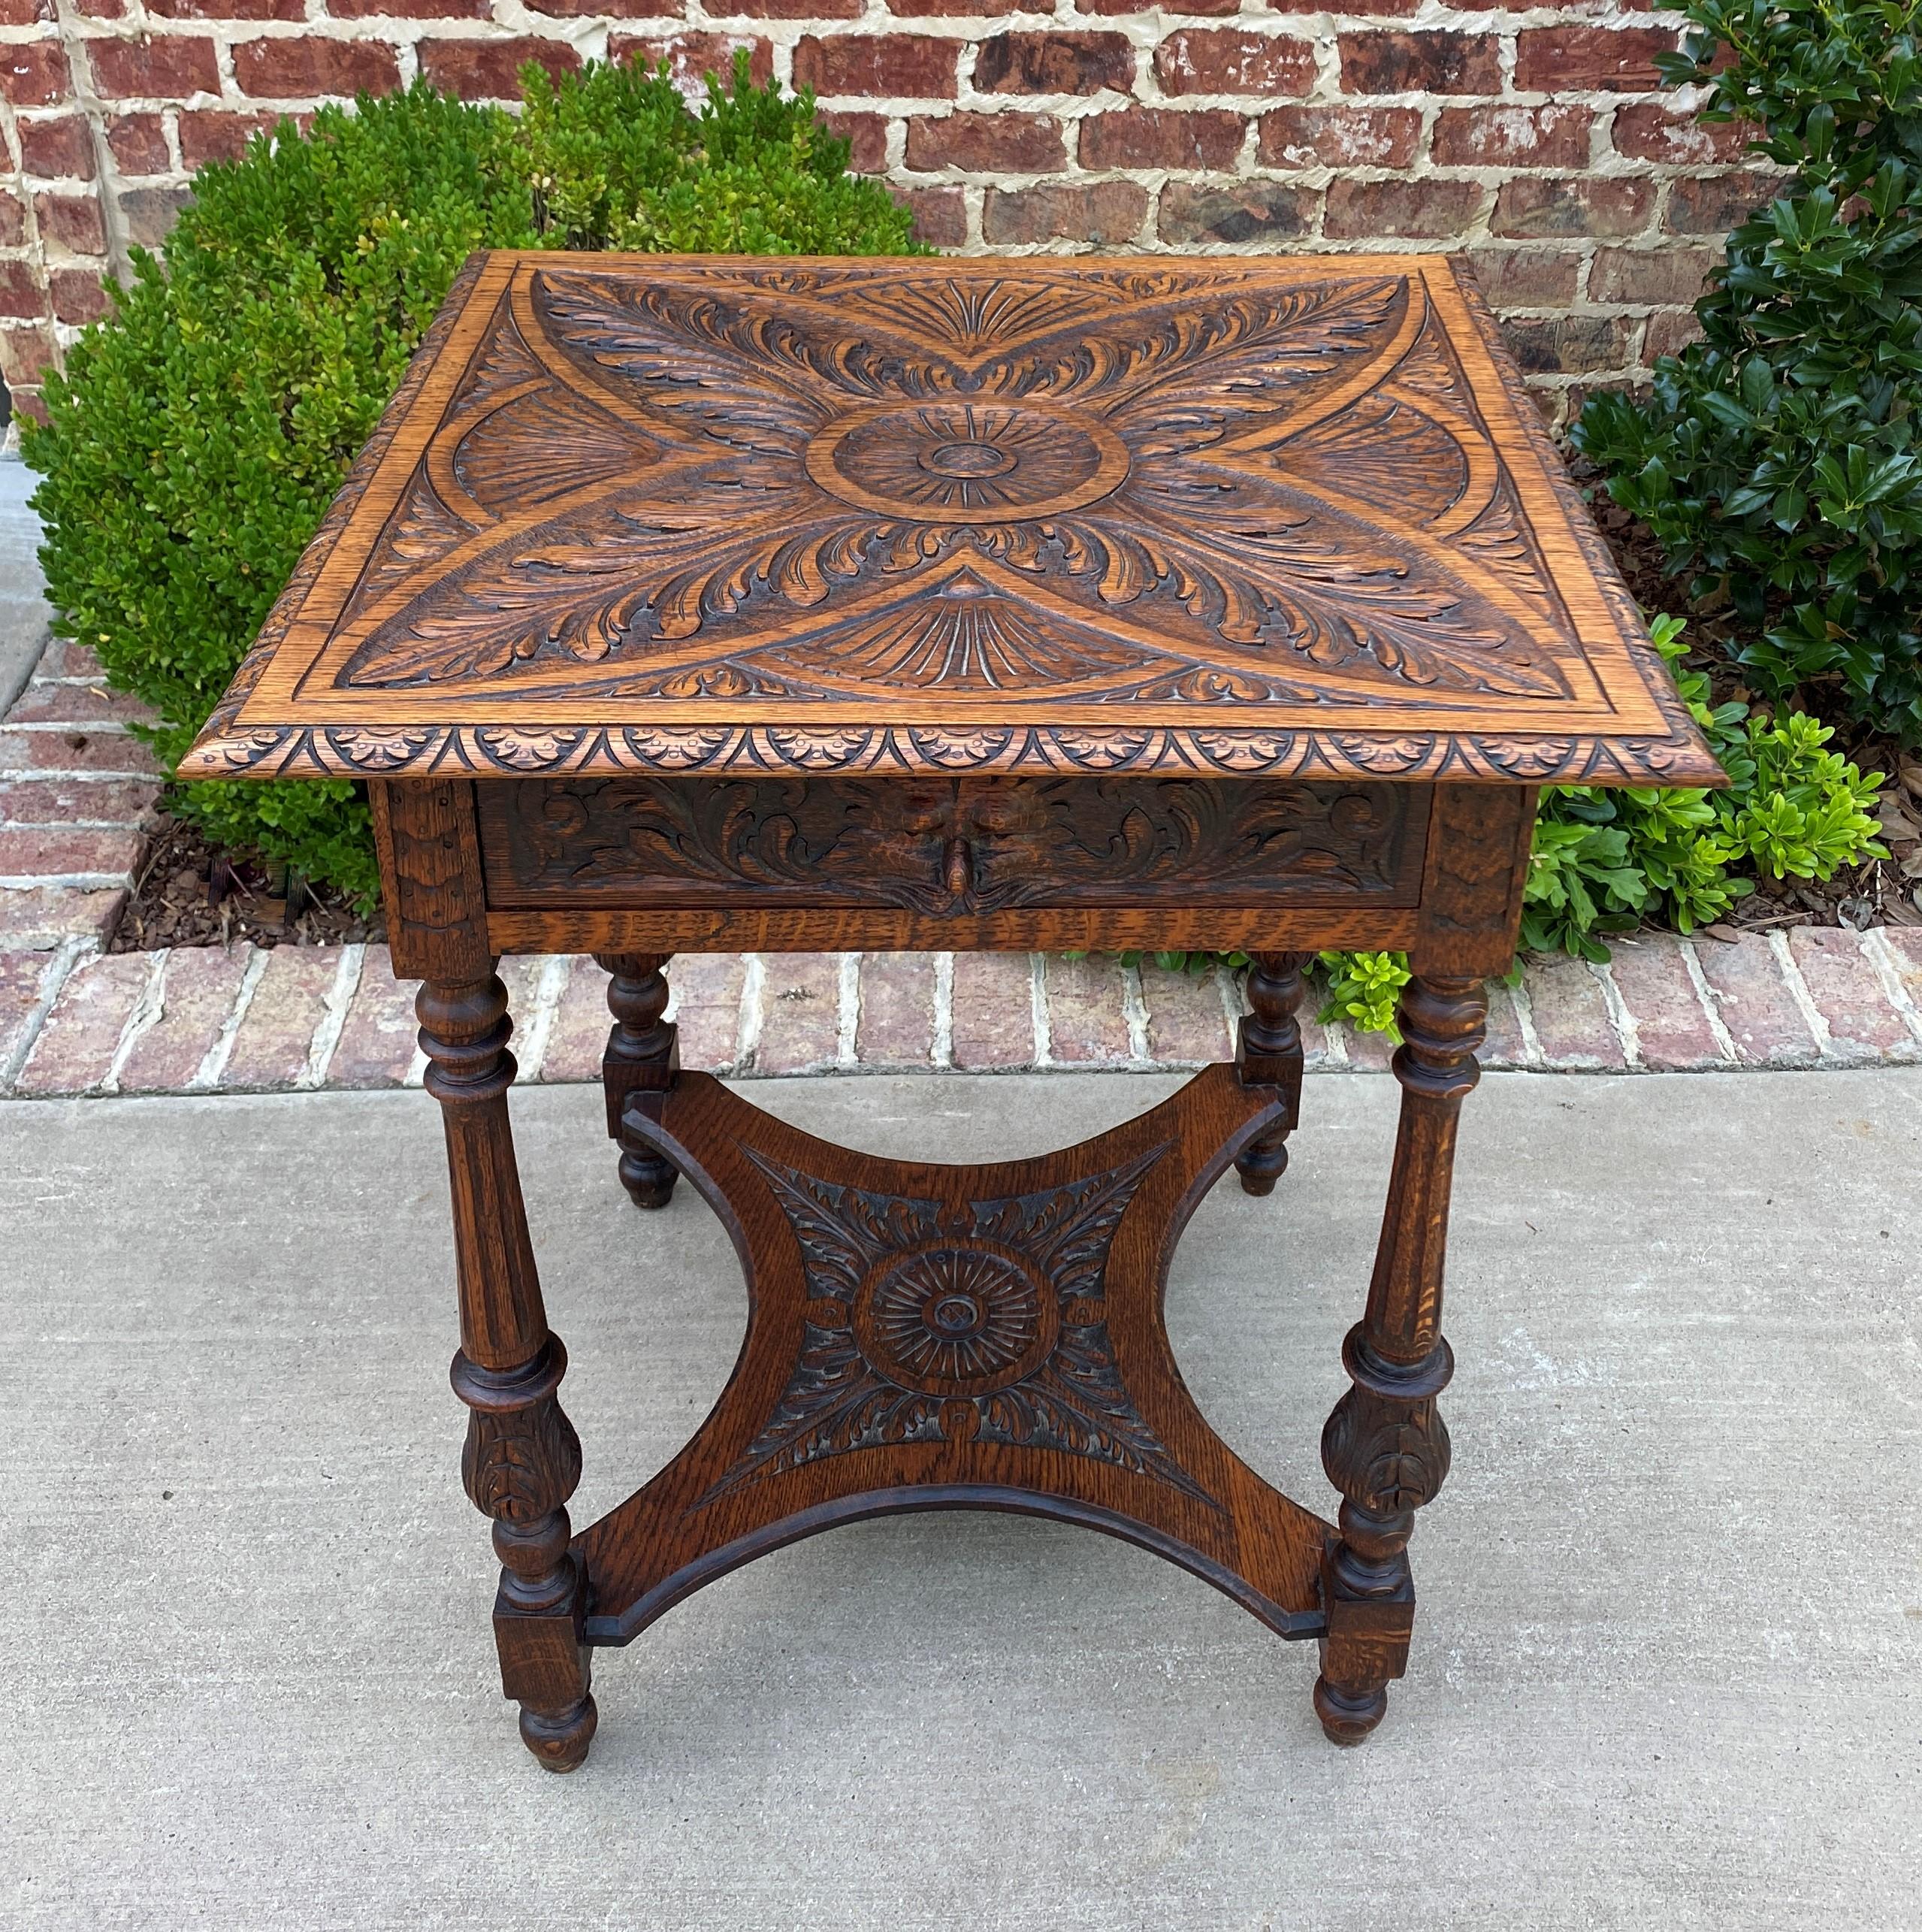 Highly carved Antique English Oak 2-Tier End Table Side Occasional Table or Nightstand with Drawer~~c. 1900 

Beautifully carved top and lower shelf ~~carved on all 4 sides~~one center drawer~~turned post legs

Versatile size~~30